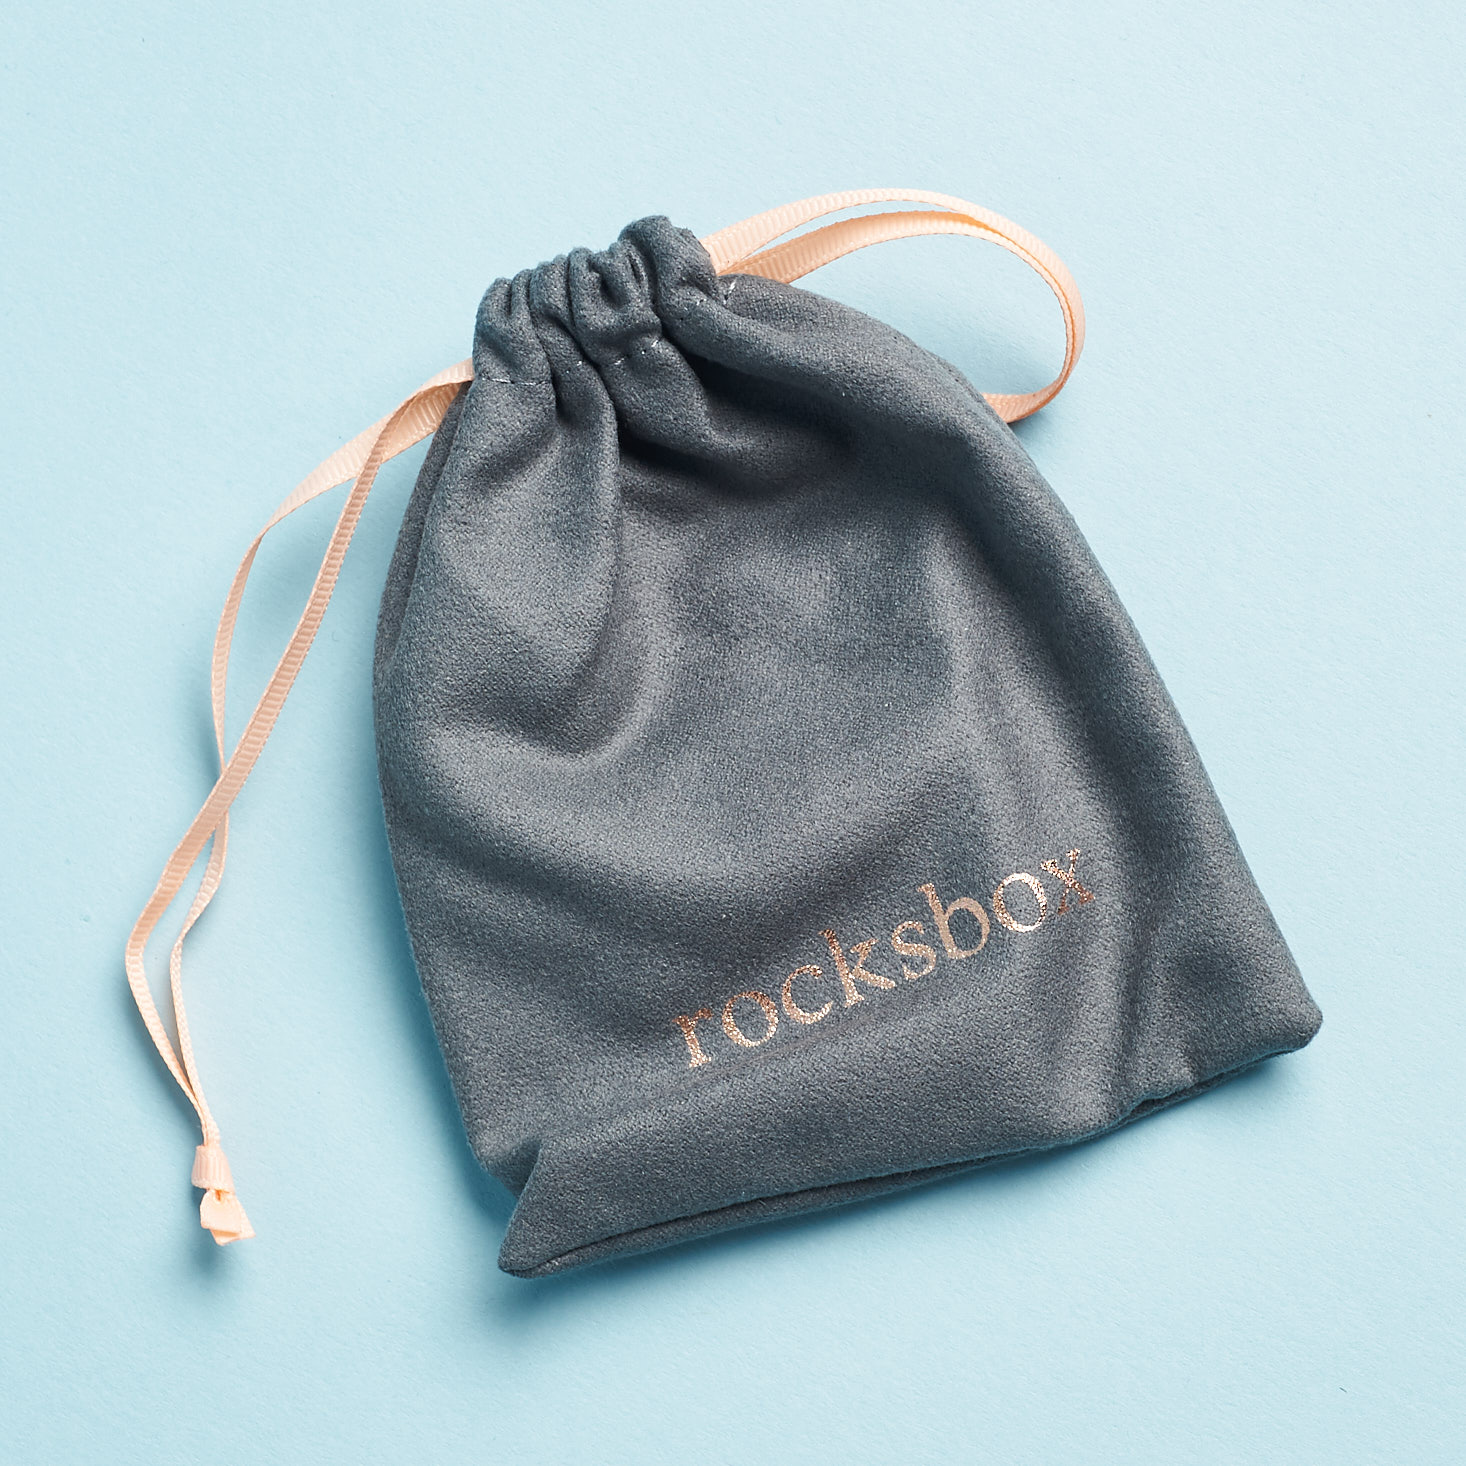 Rocksbox June 2019 Jewelry subscription review pouch